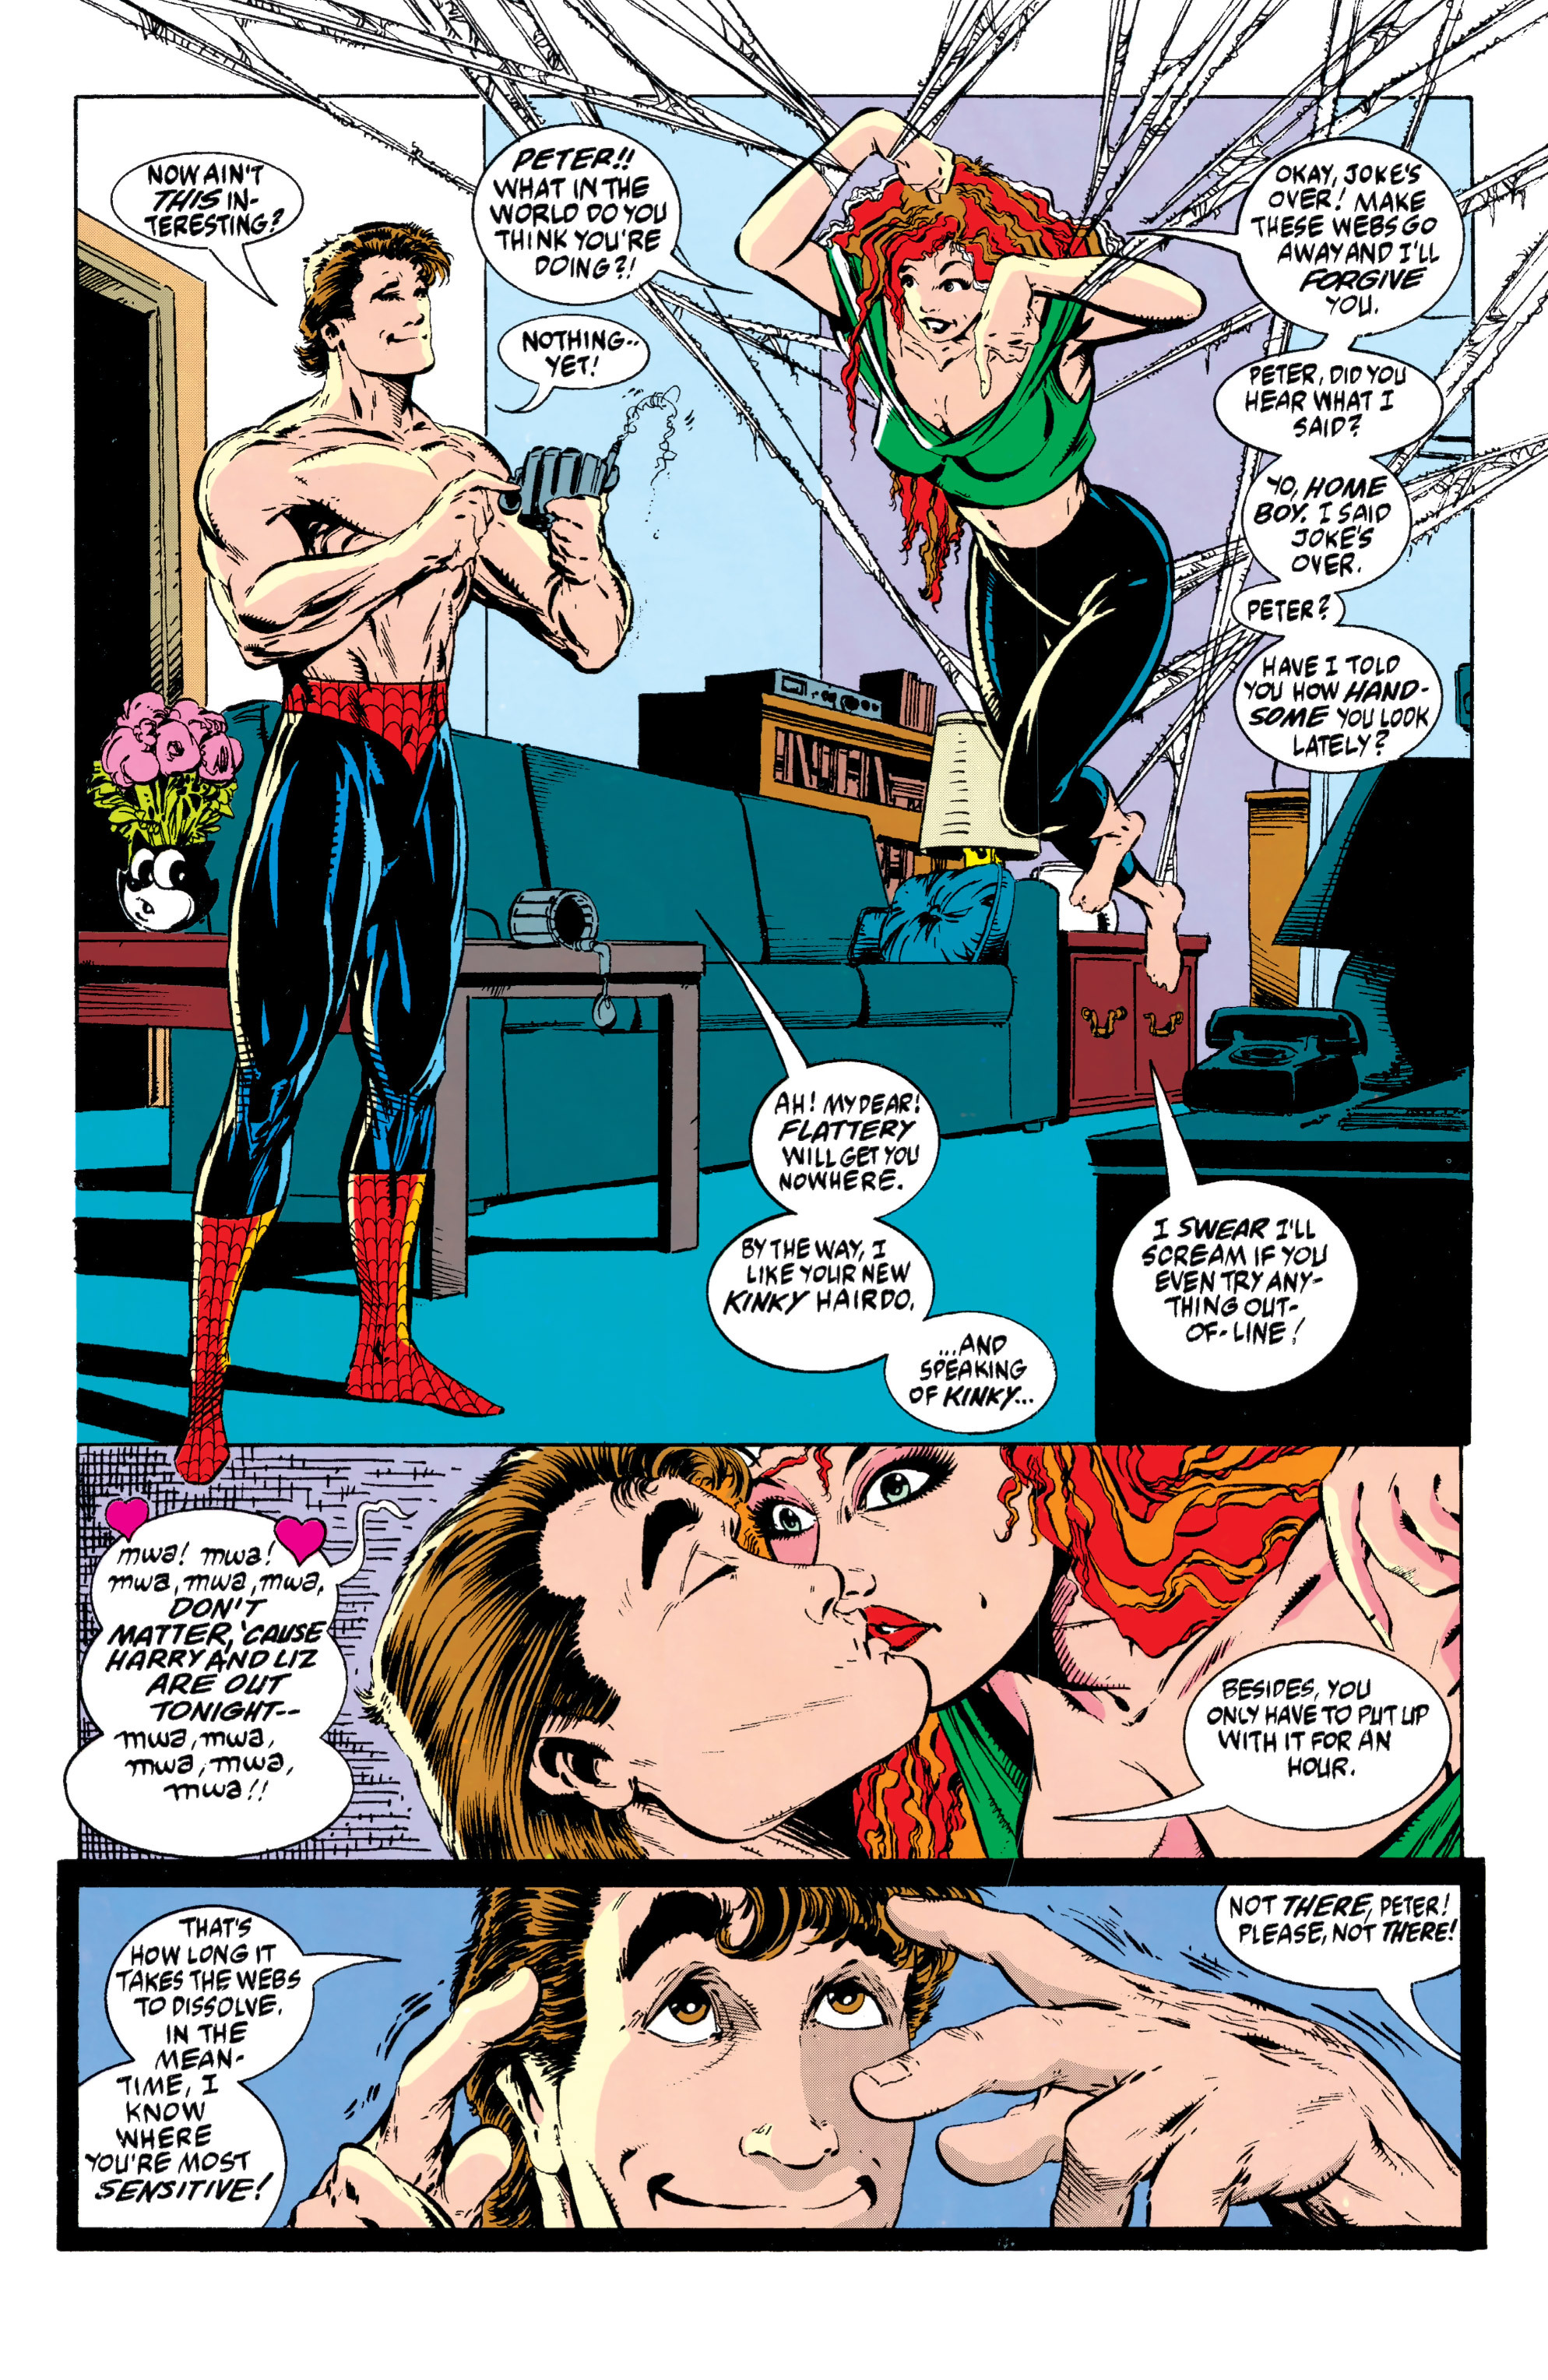 Spider-Man (1990) 13_-_Sub_City_Part_1_of_2 Page 5